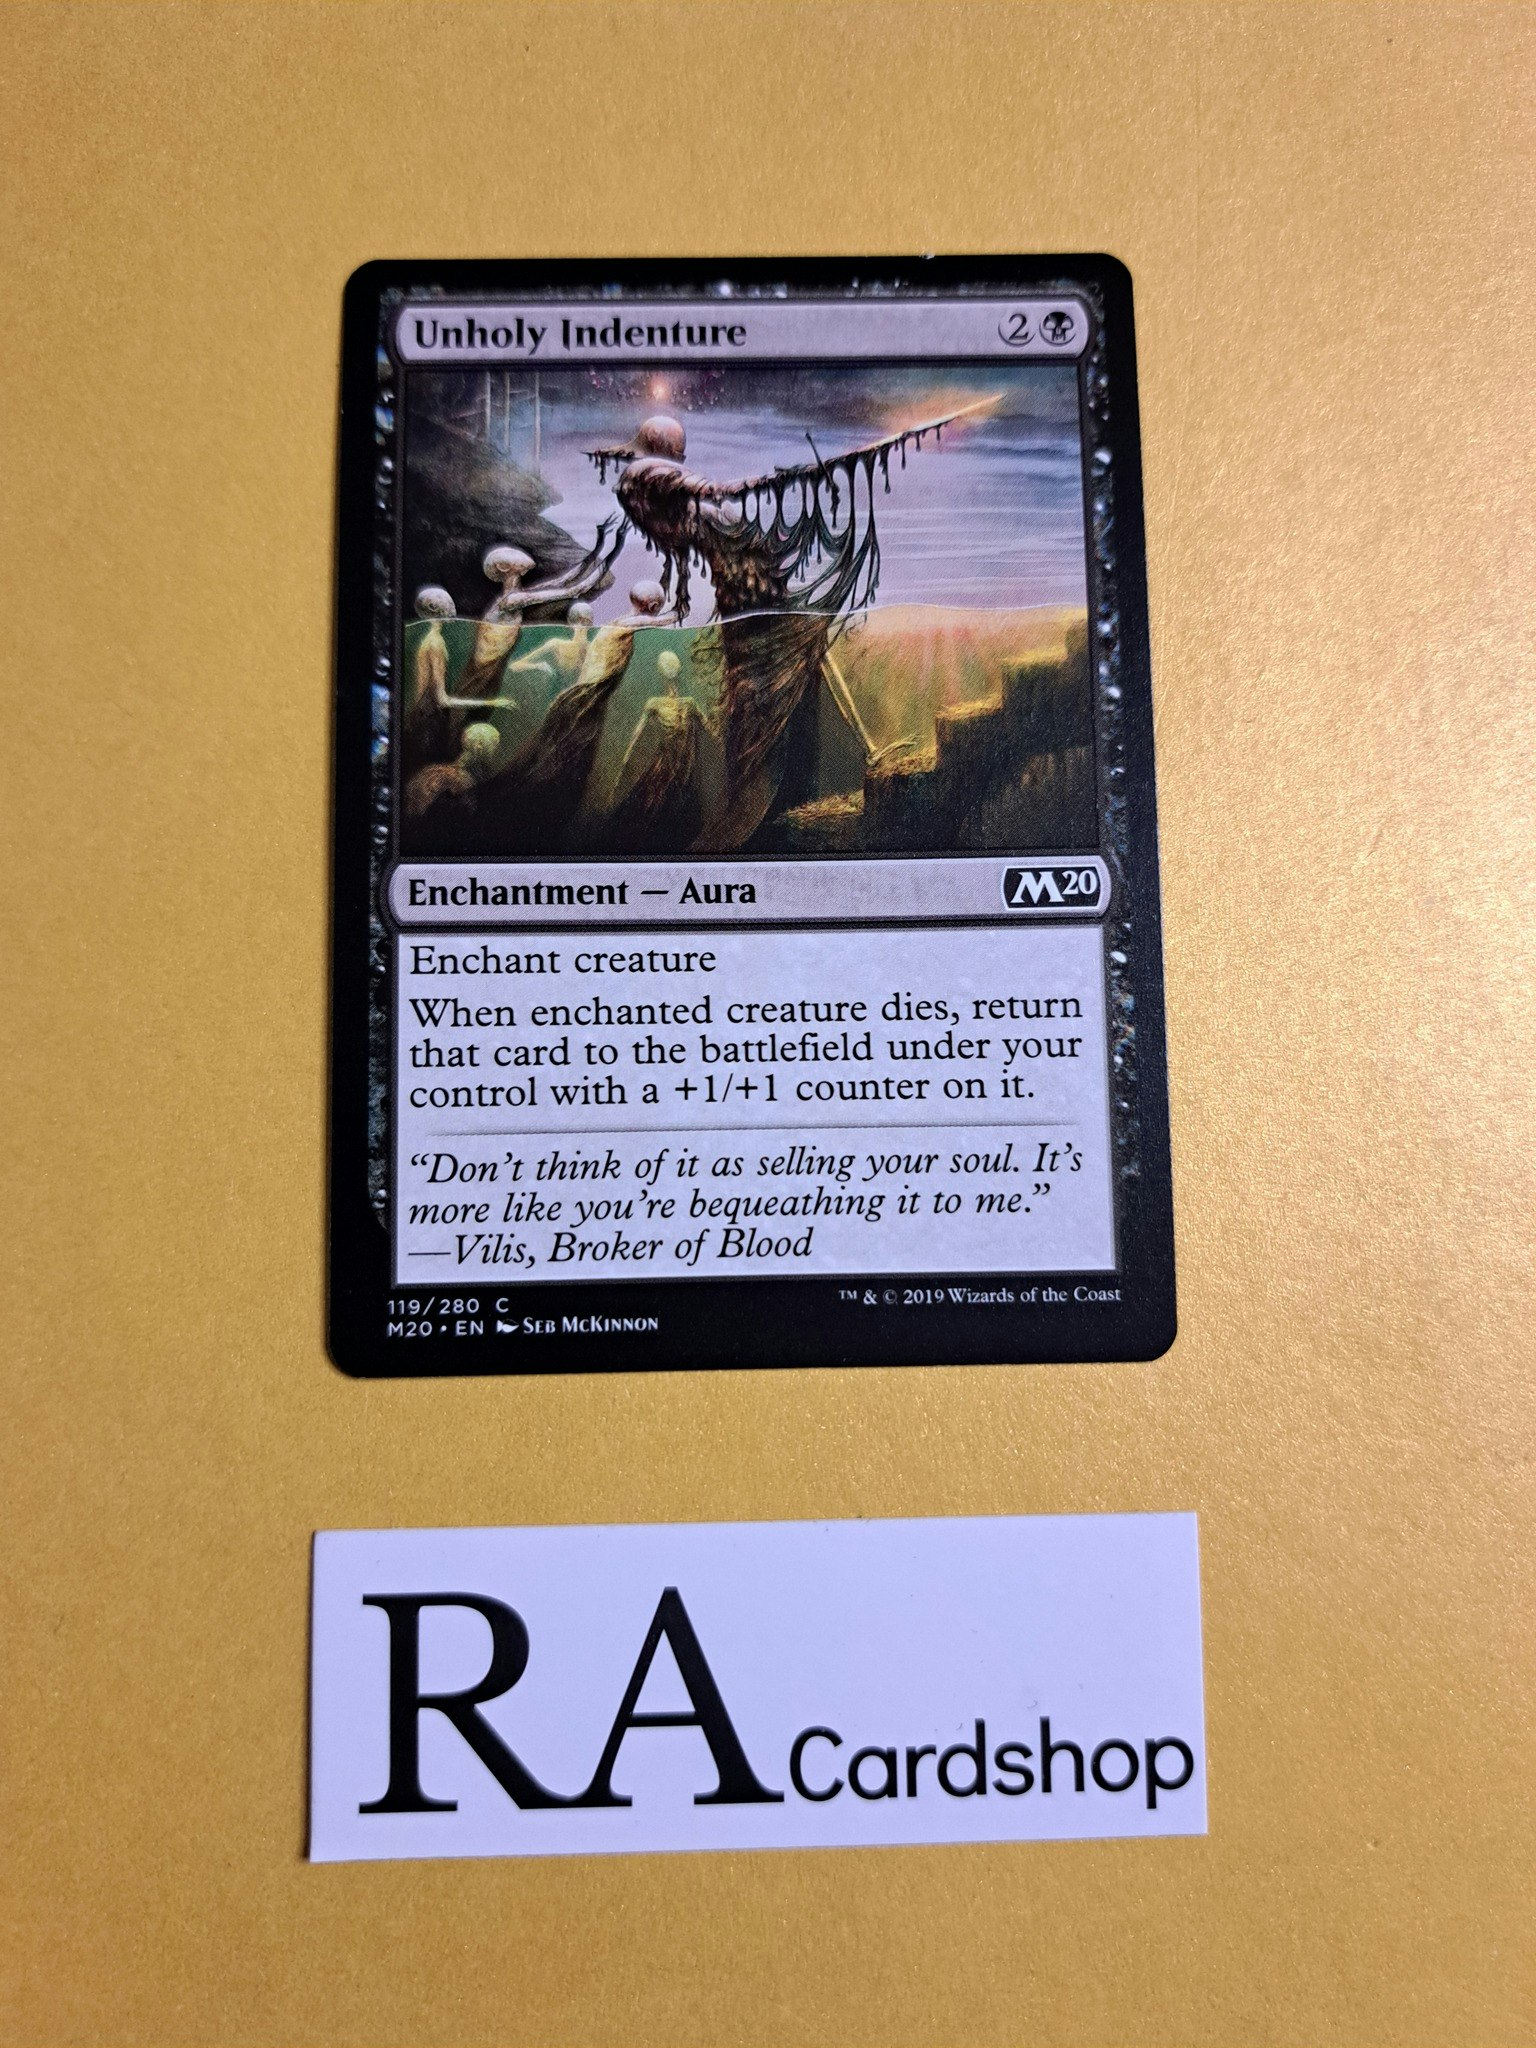 Unholy Indenture Common 119/280 Core 2020 (M20) Magic the Gathering